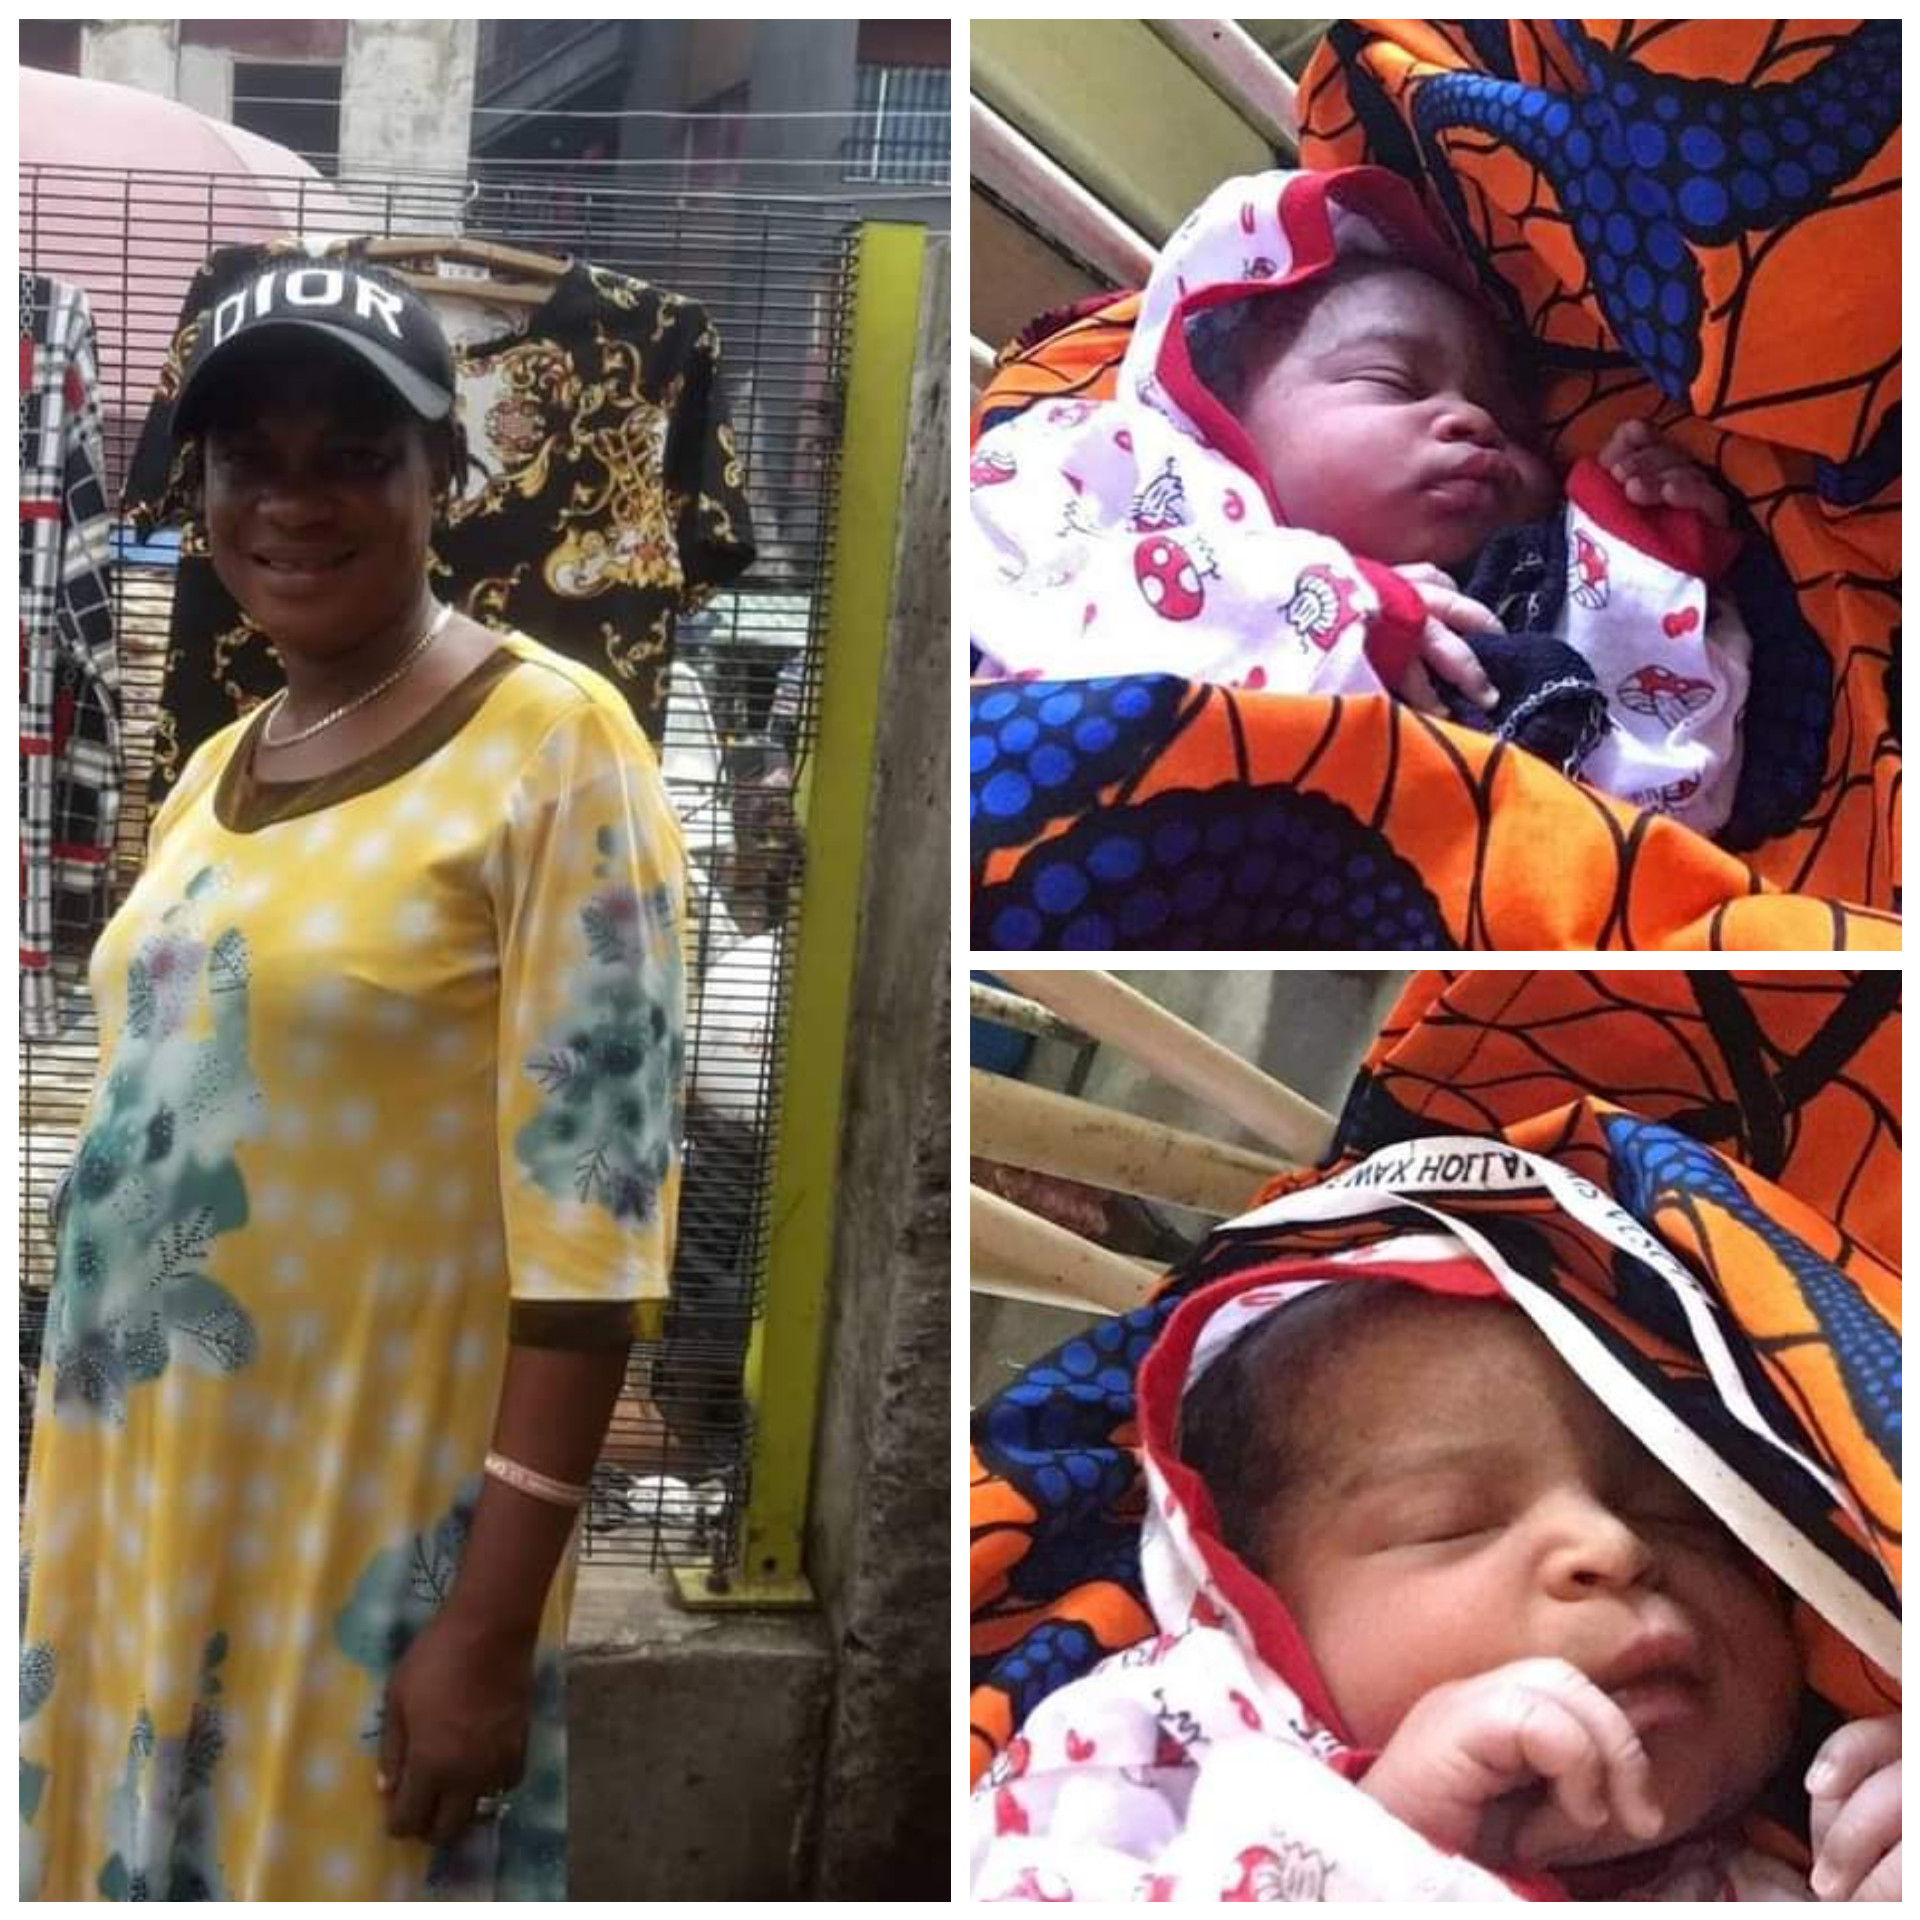 NIGERIAN LADY CELEBRATES AS HER SISTER GIVES BIRTH TO TWINS AFTER 18 YEARS OF WAITING